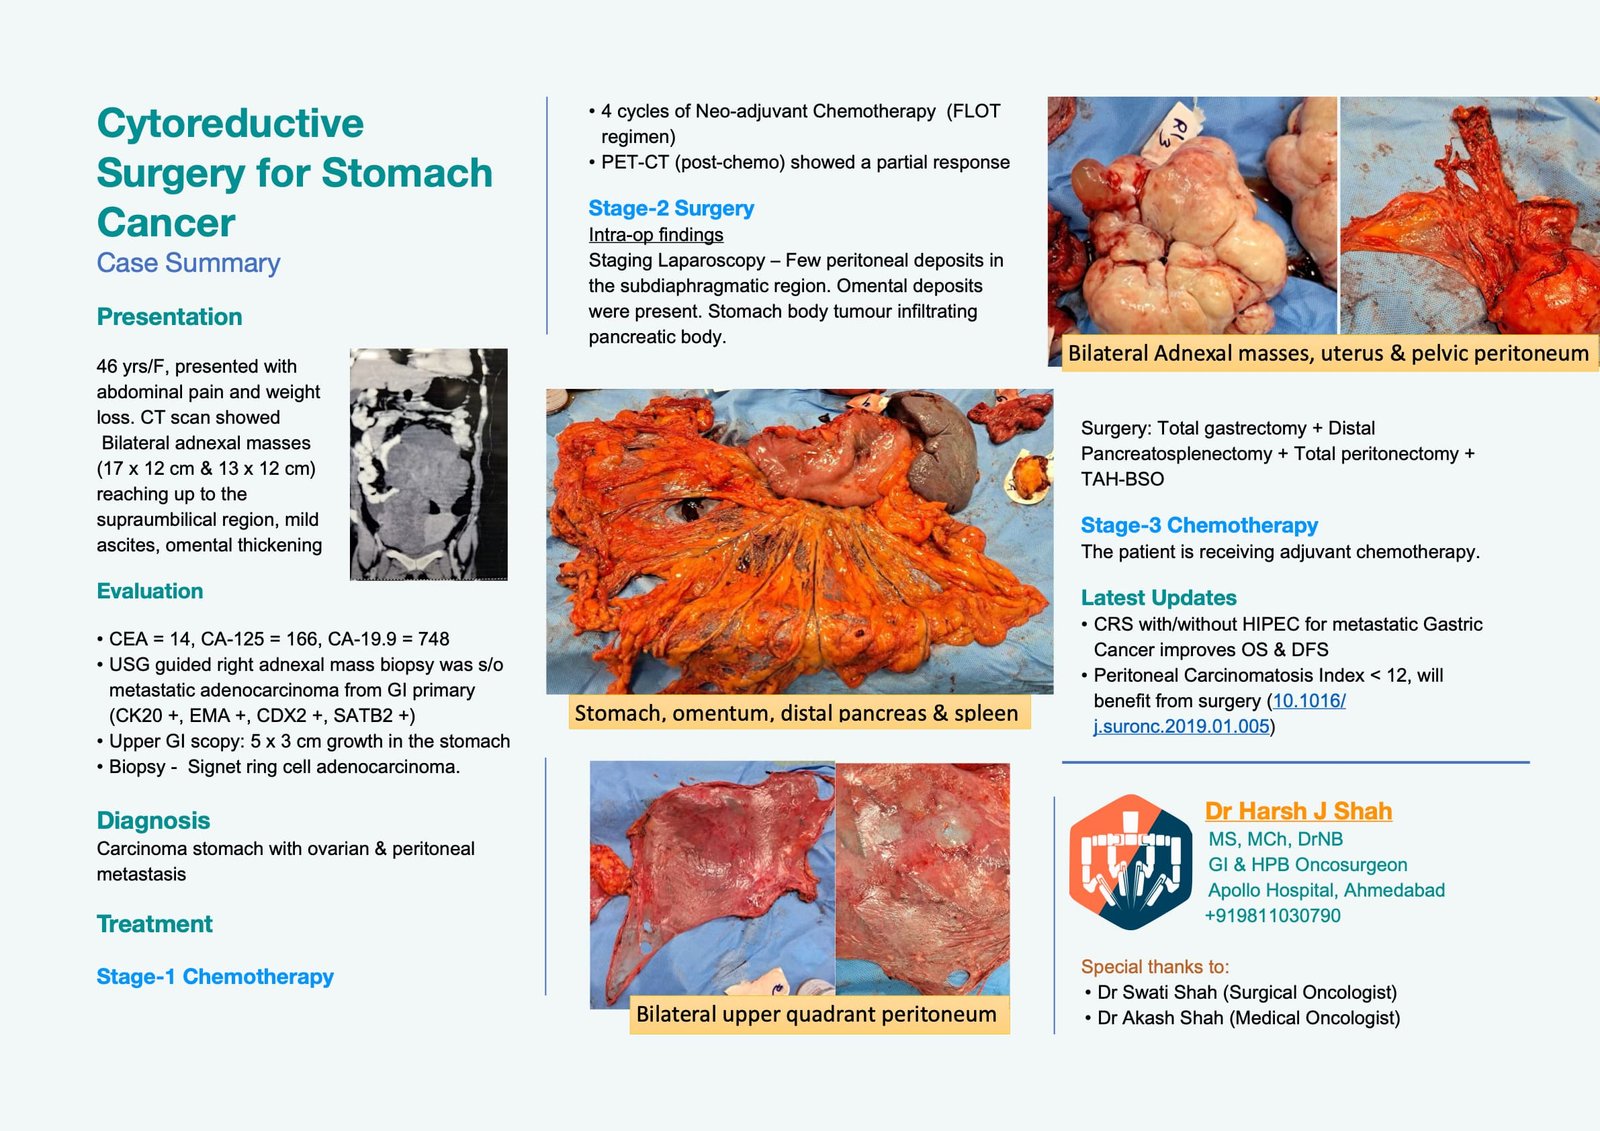 Cytoreductive Surgery for Stomach Cancer Case Summary